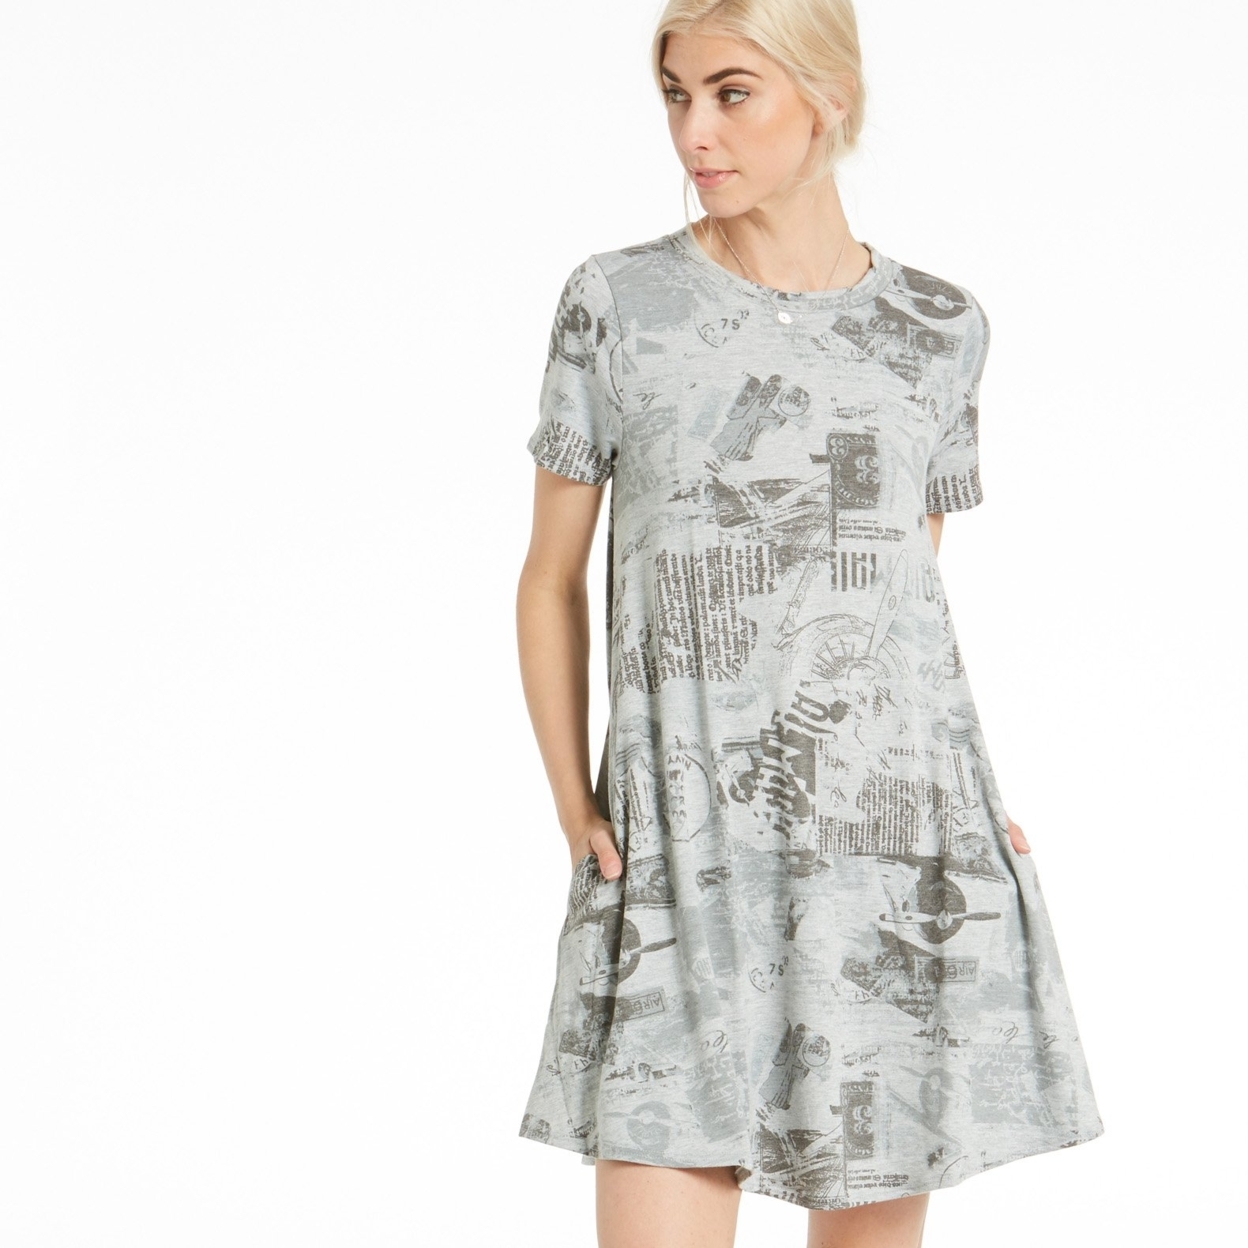 Old World New Discovery Dress - Gray Charm, Small (2-4)